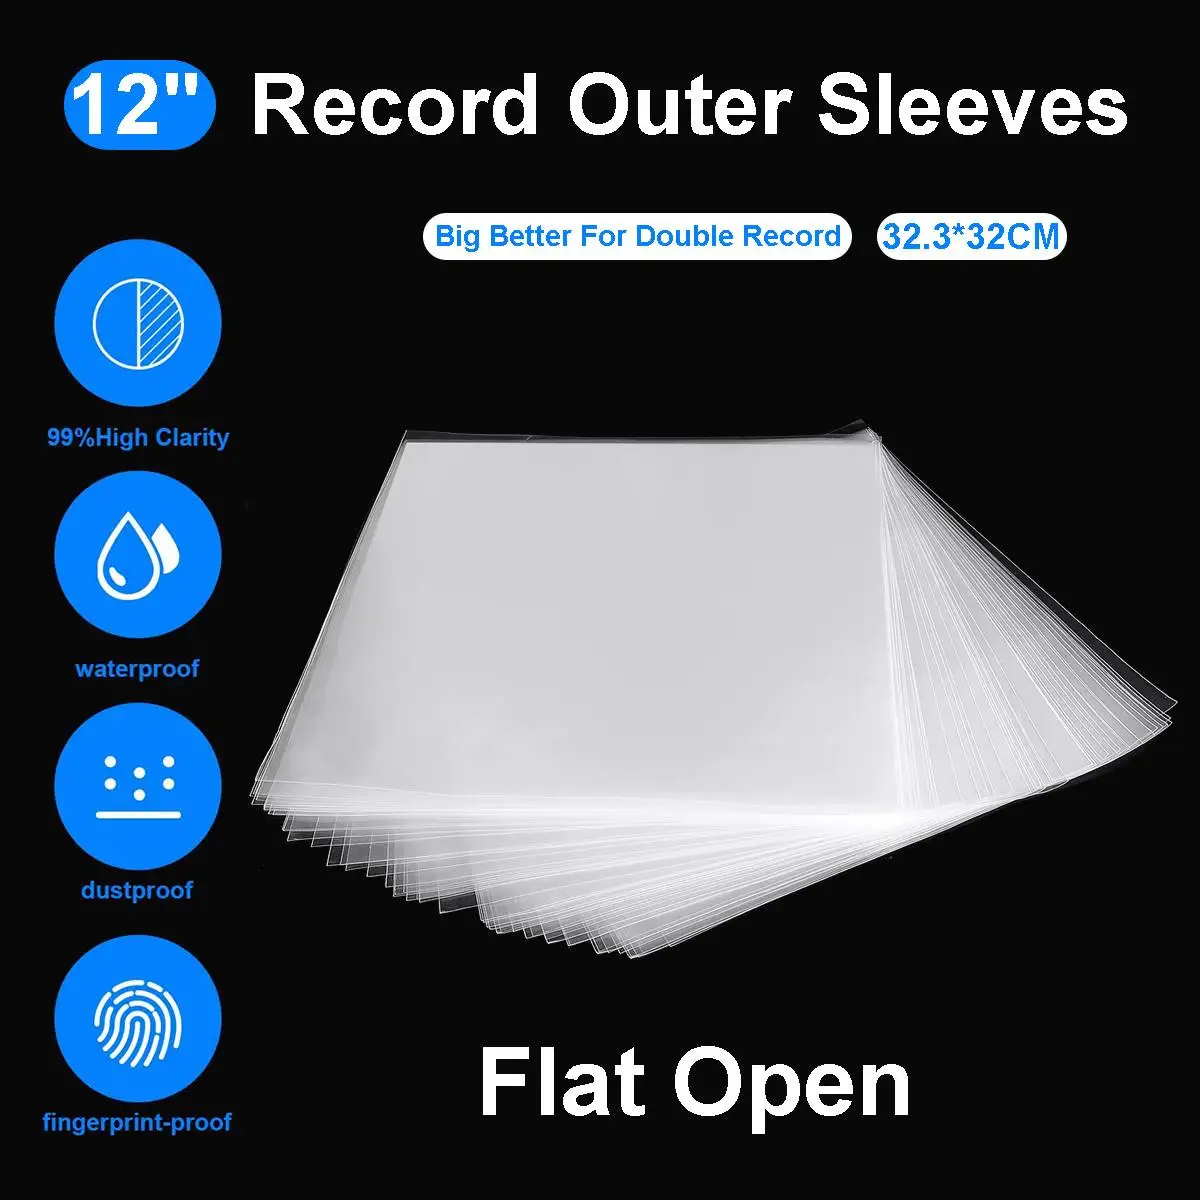 

50PCS OPP Gel Recording Protective Sleeve for Turntable Player LP Vinyl Record Self Adhesive Records Bag 12" 32.3cm*32cm